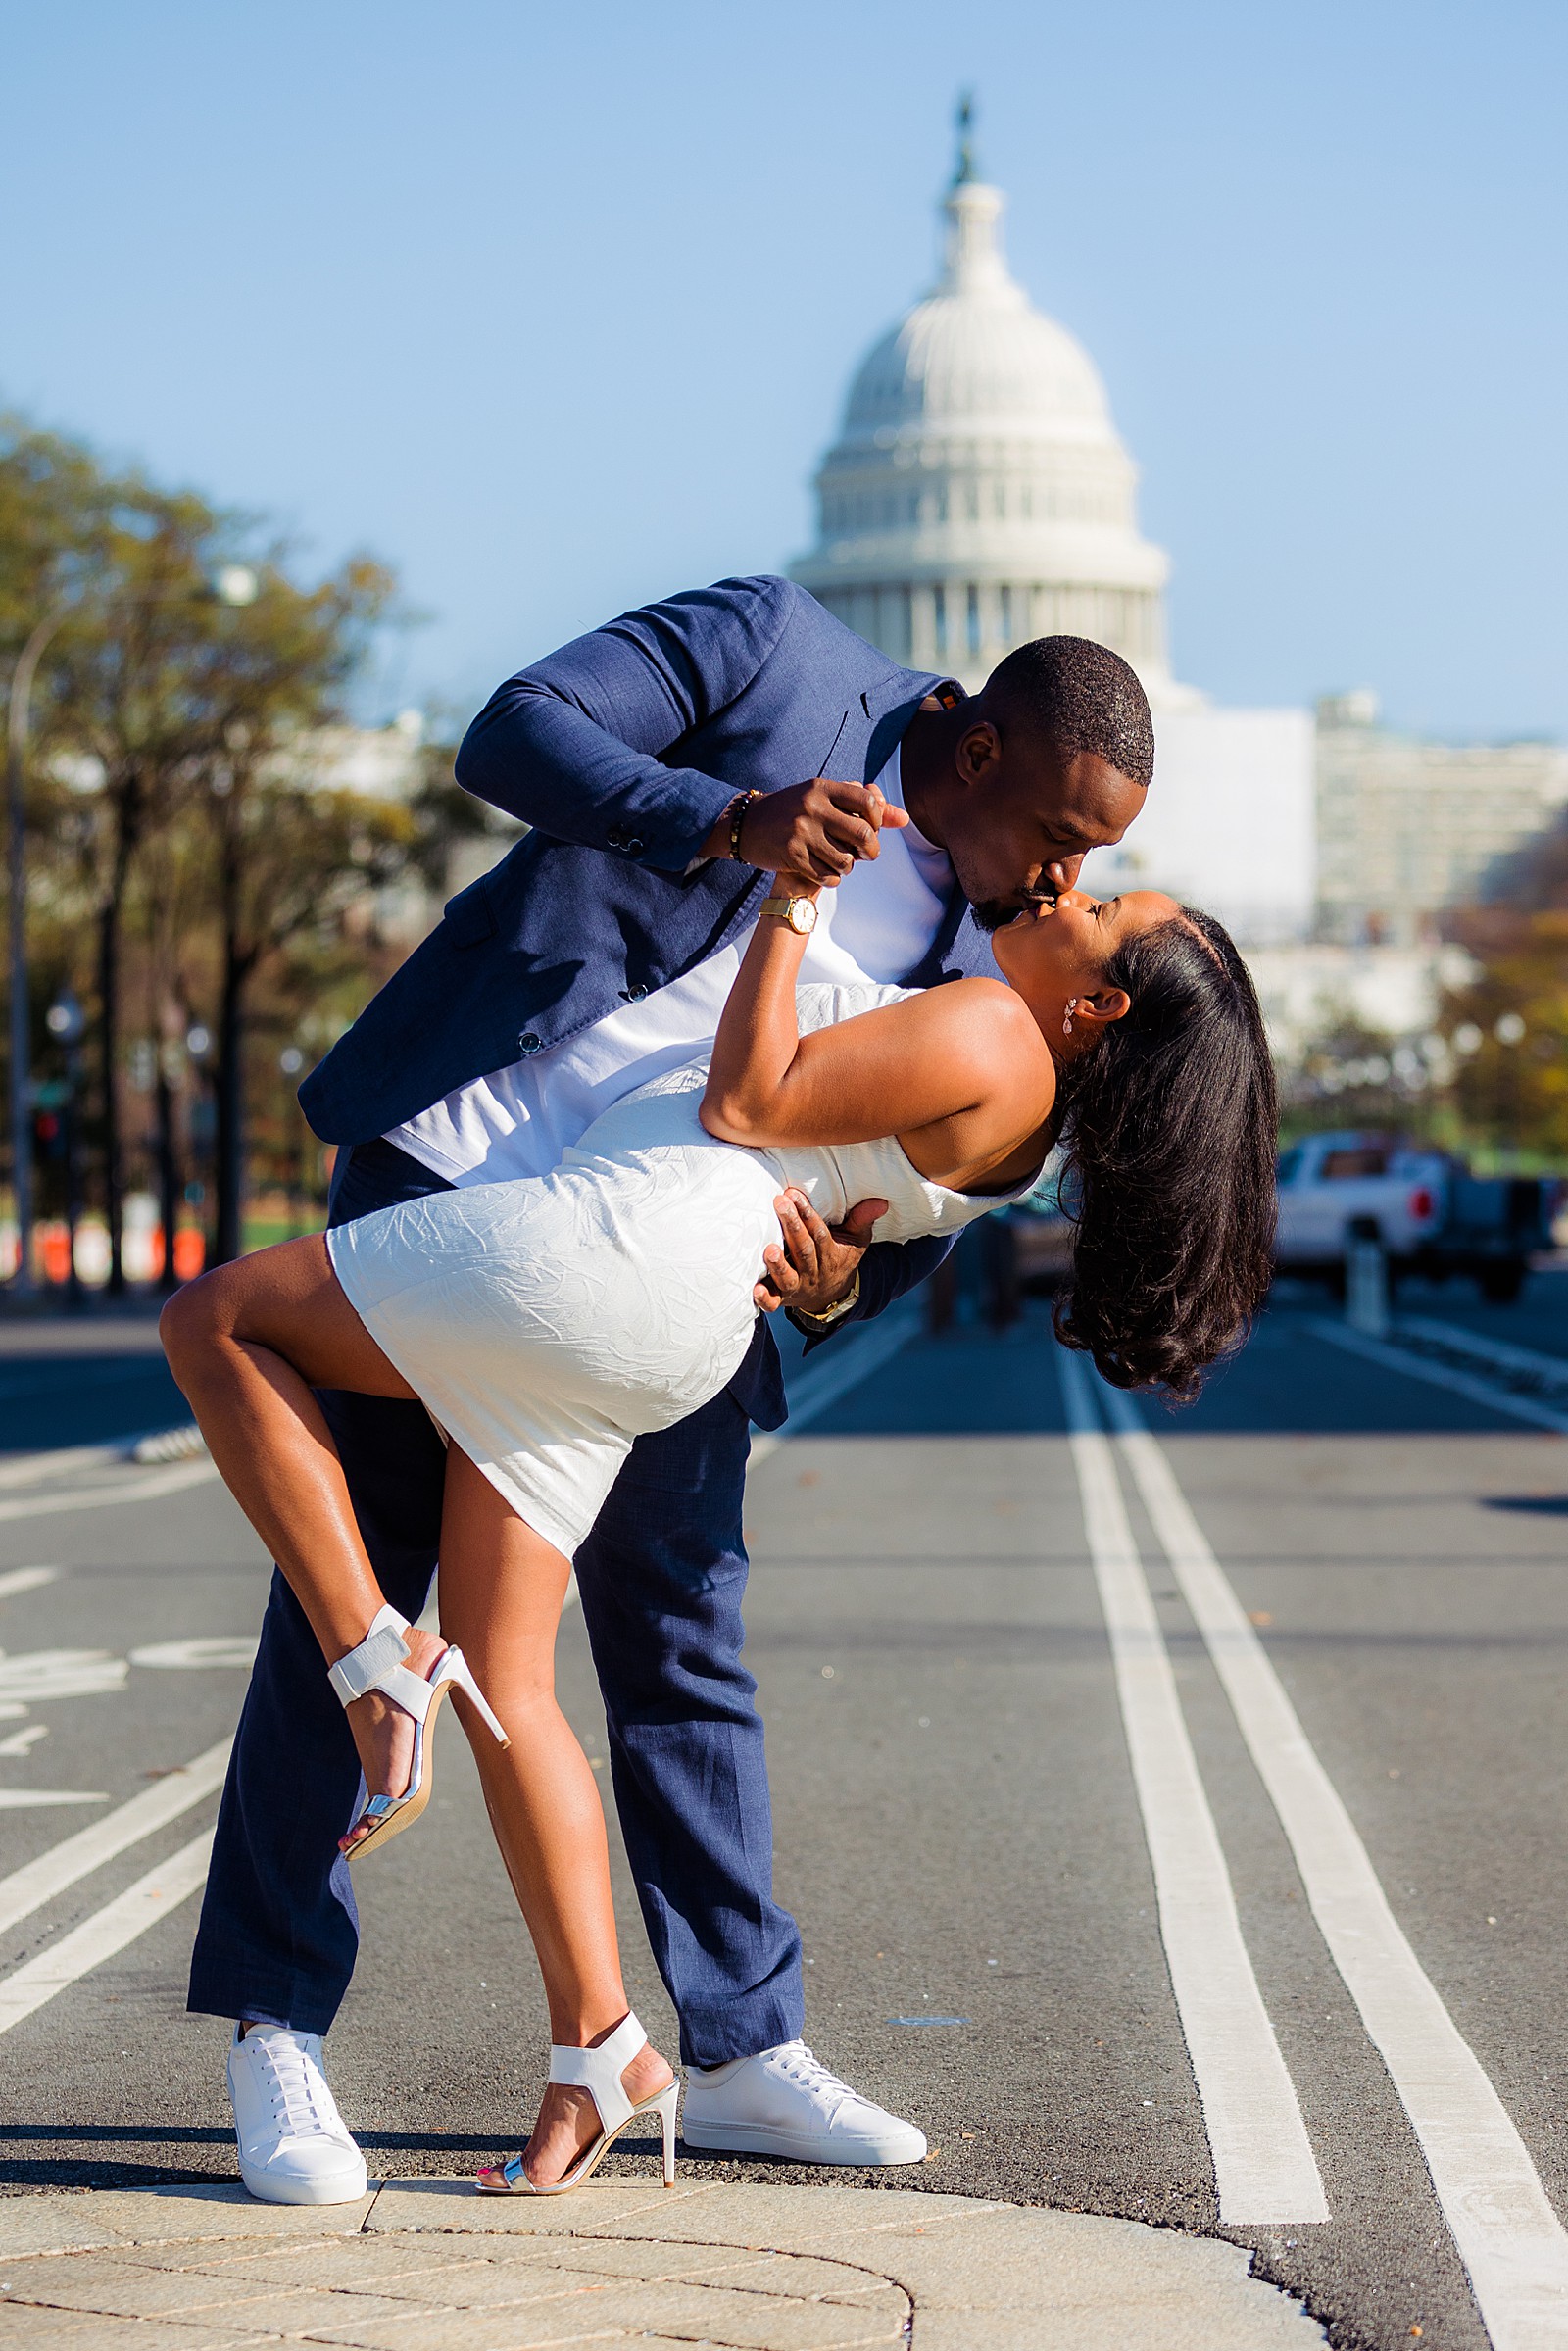 Engaged couple practices their dip with the US Capitol in the background.